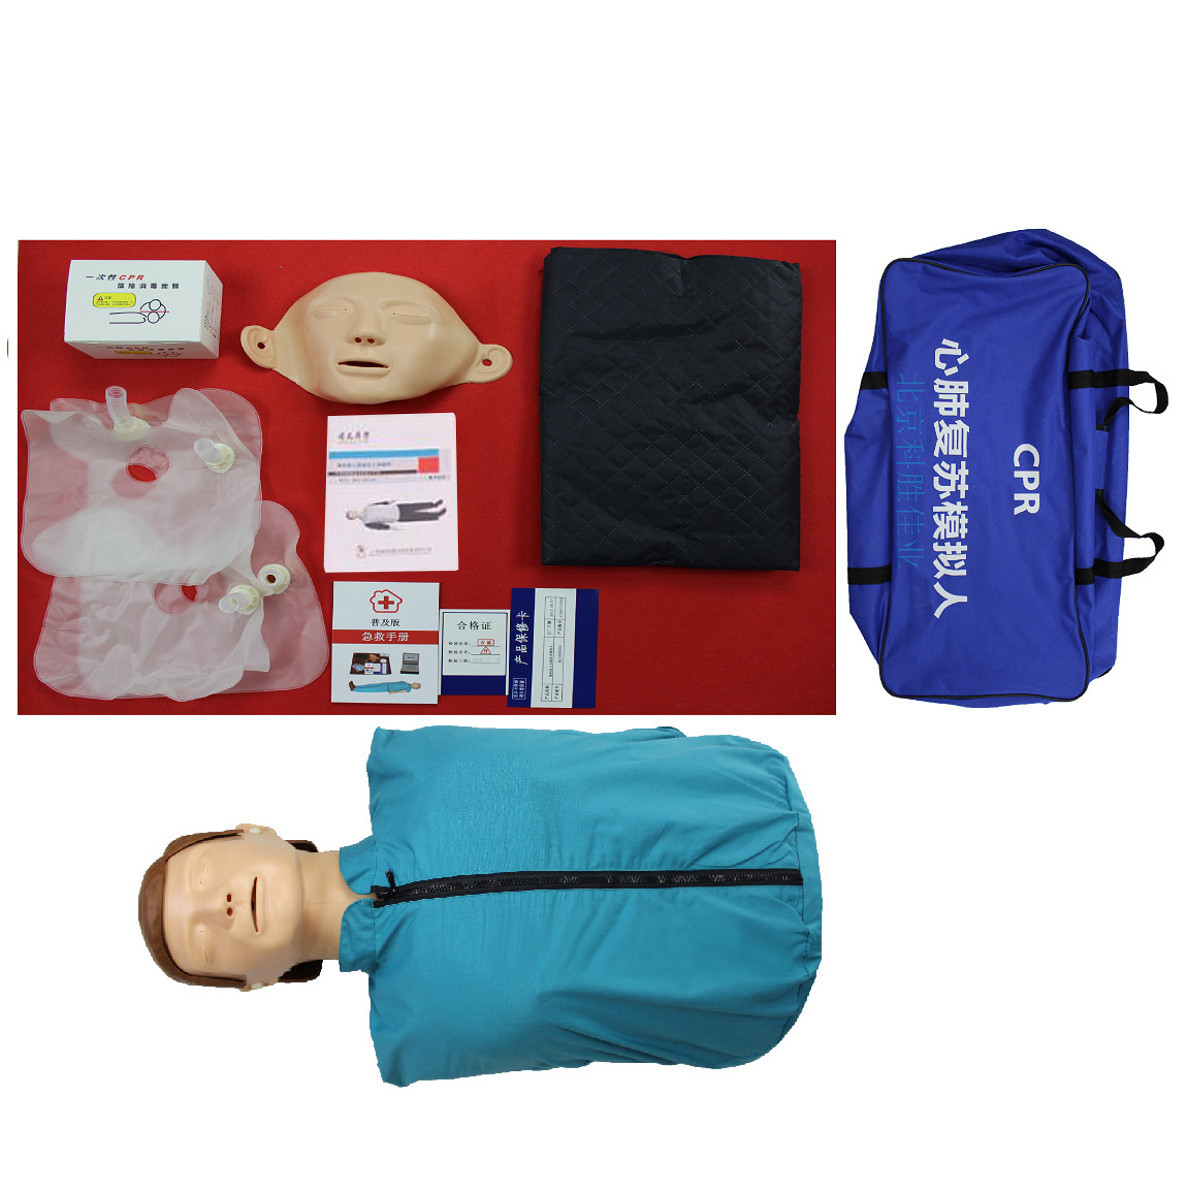 CPR-Adult-Manikin-AED-First-Aid-Training-Dummy-Training-Medical-Model-Respiration-Human-1545480-6